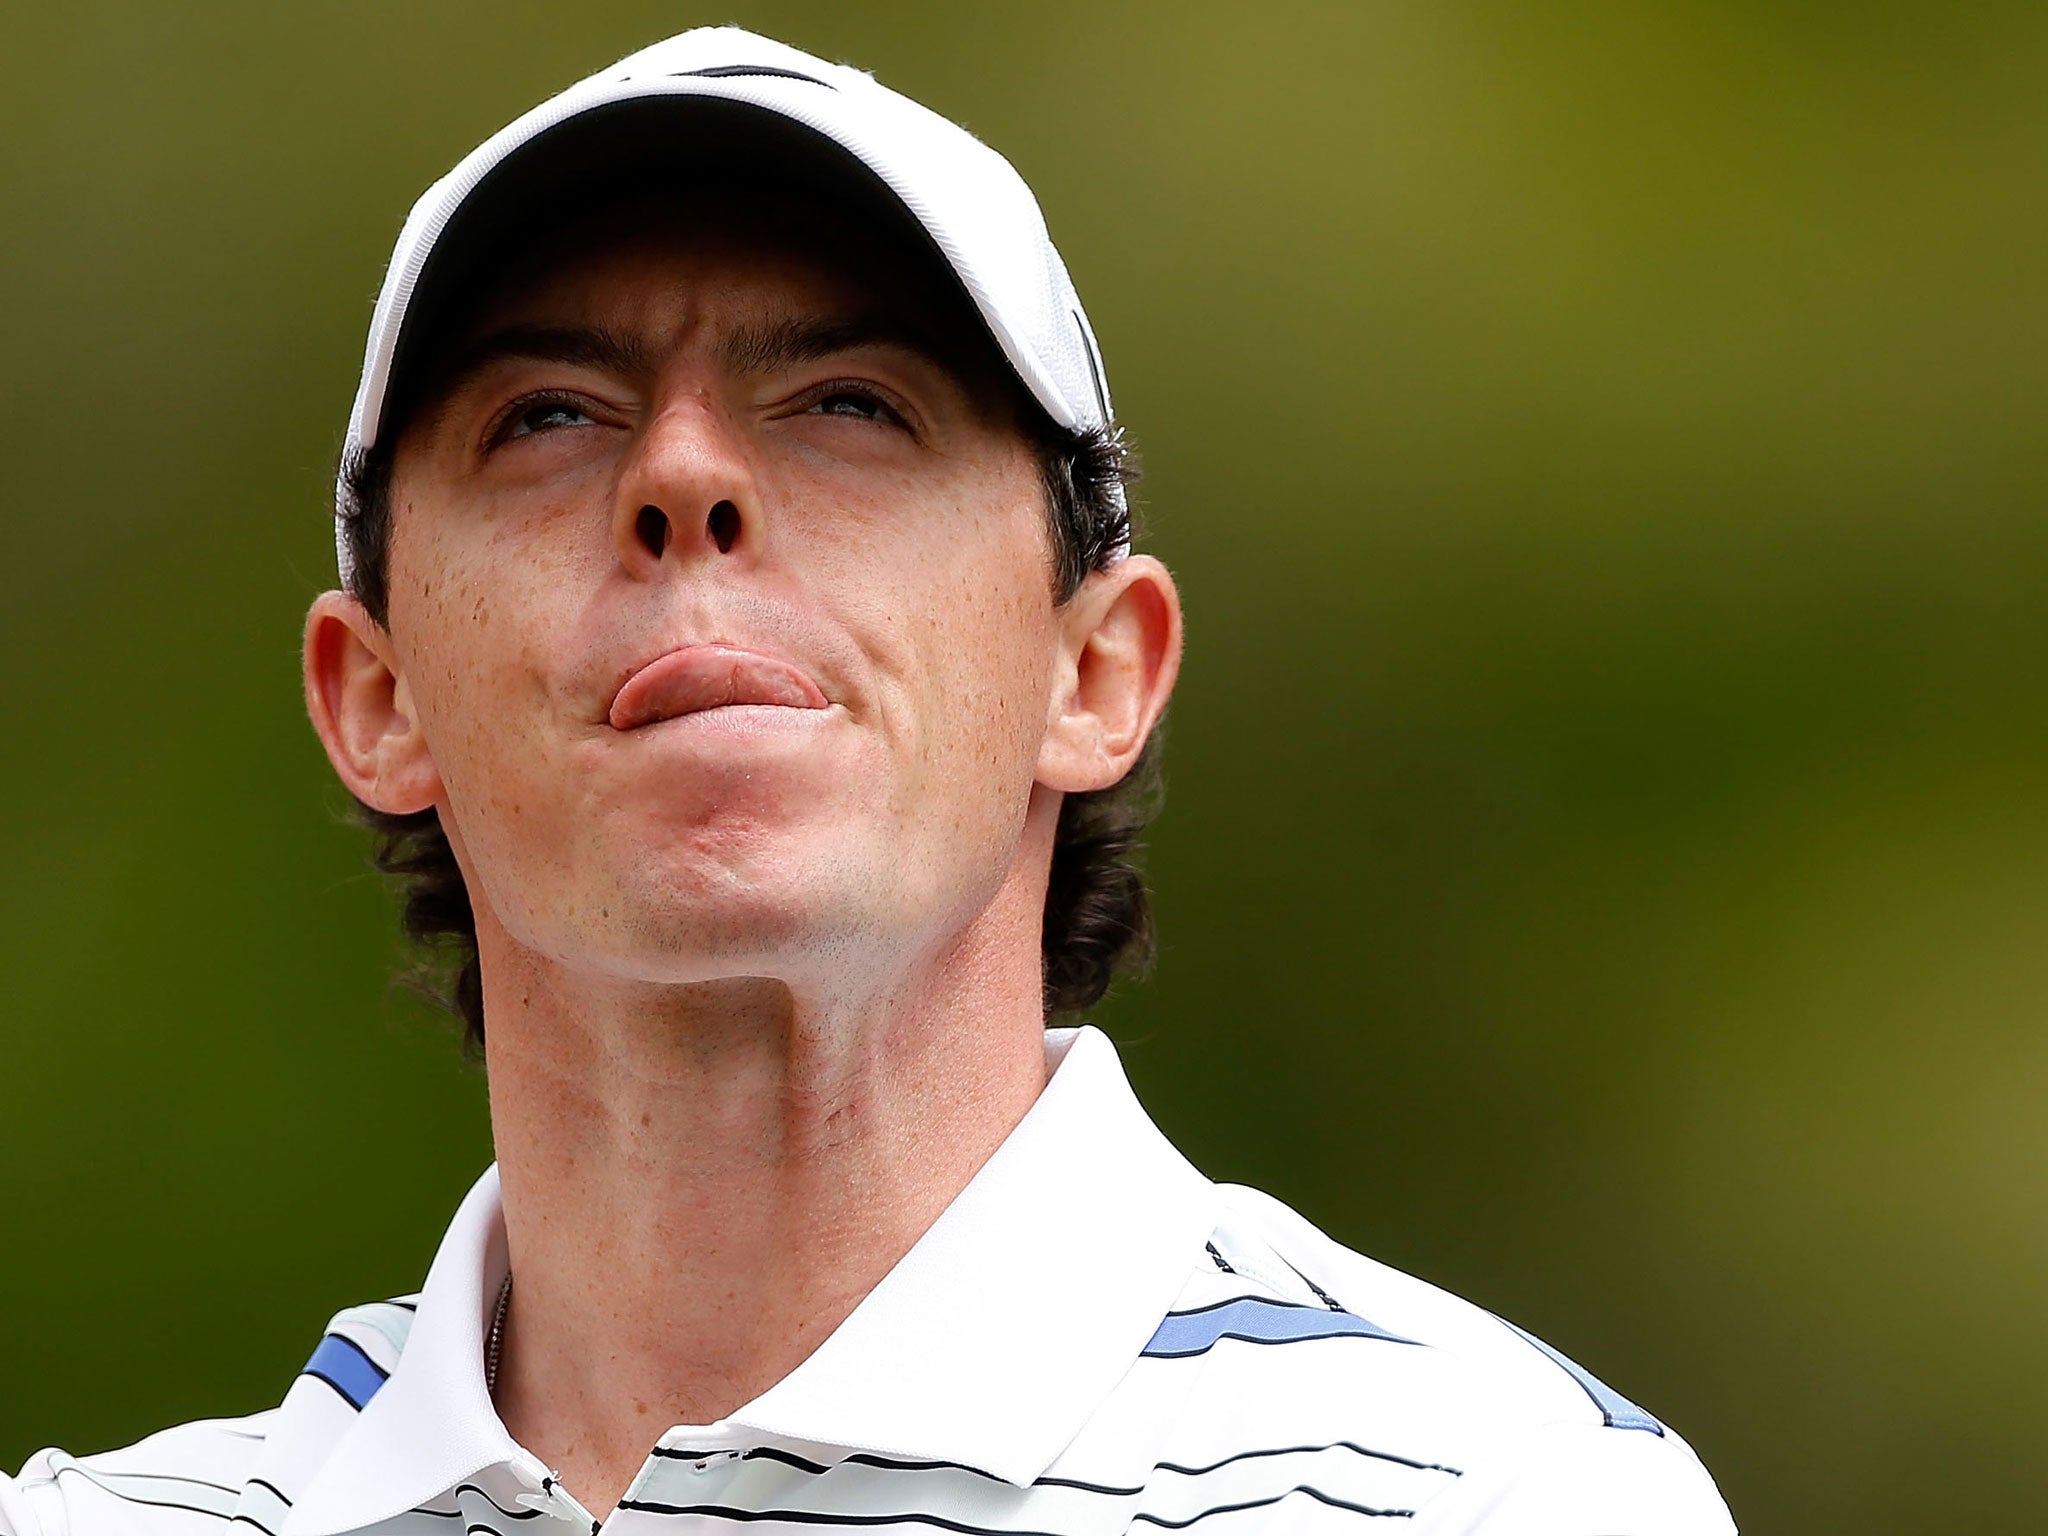 Rory McIlroy fired three birdies in succession after a poor start